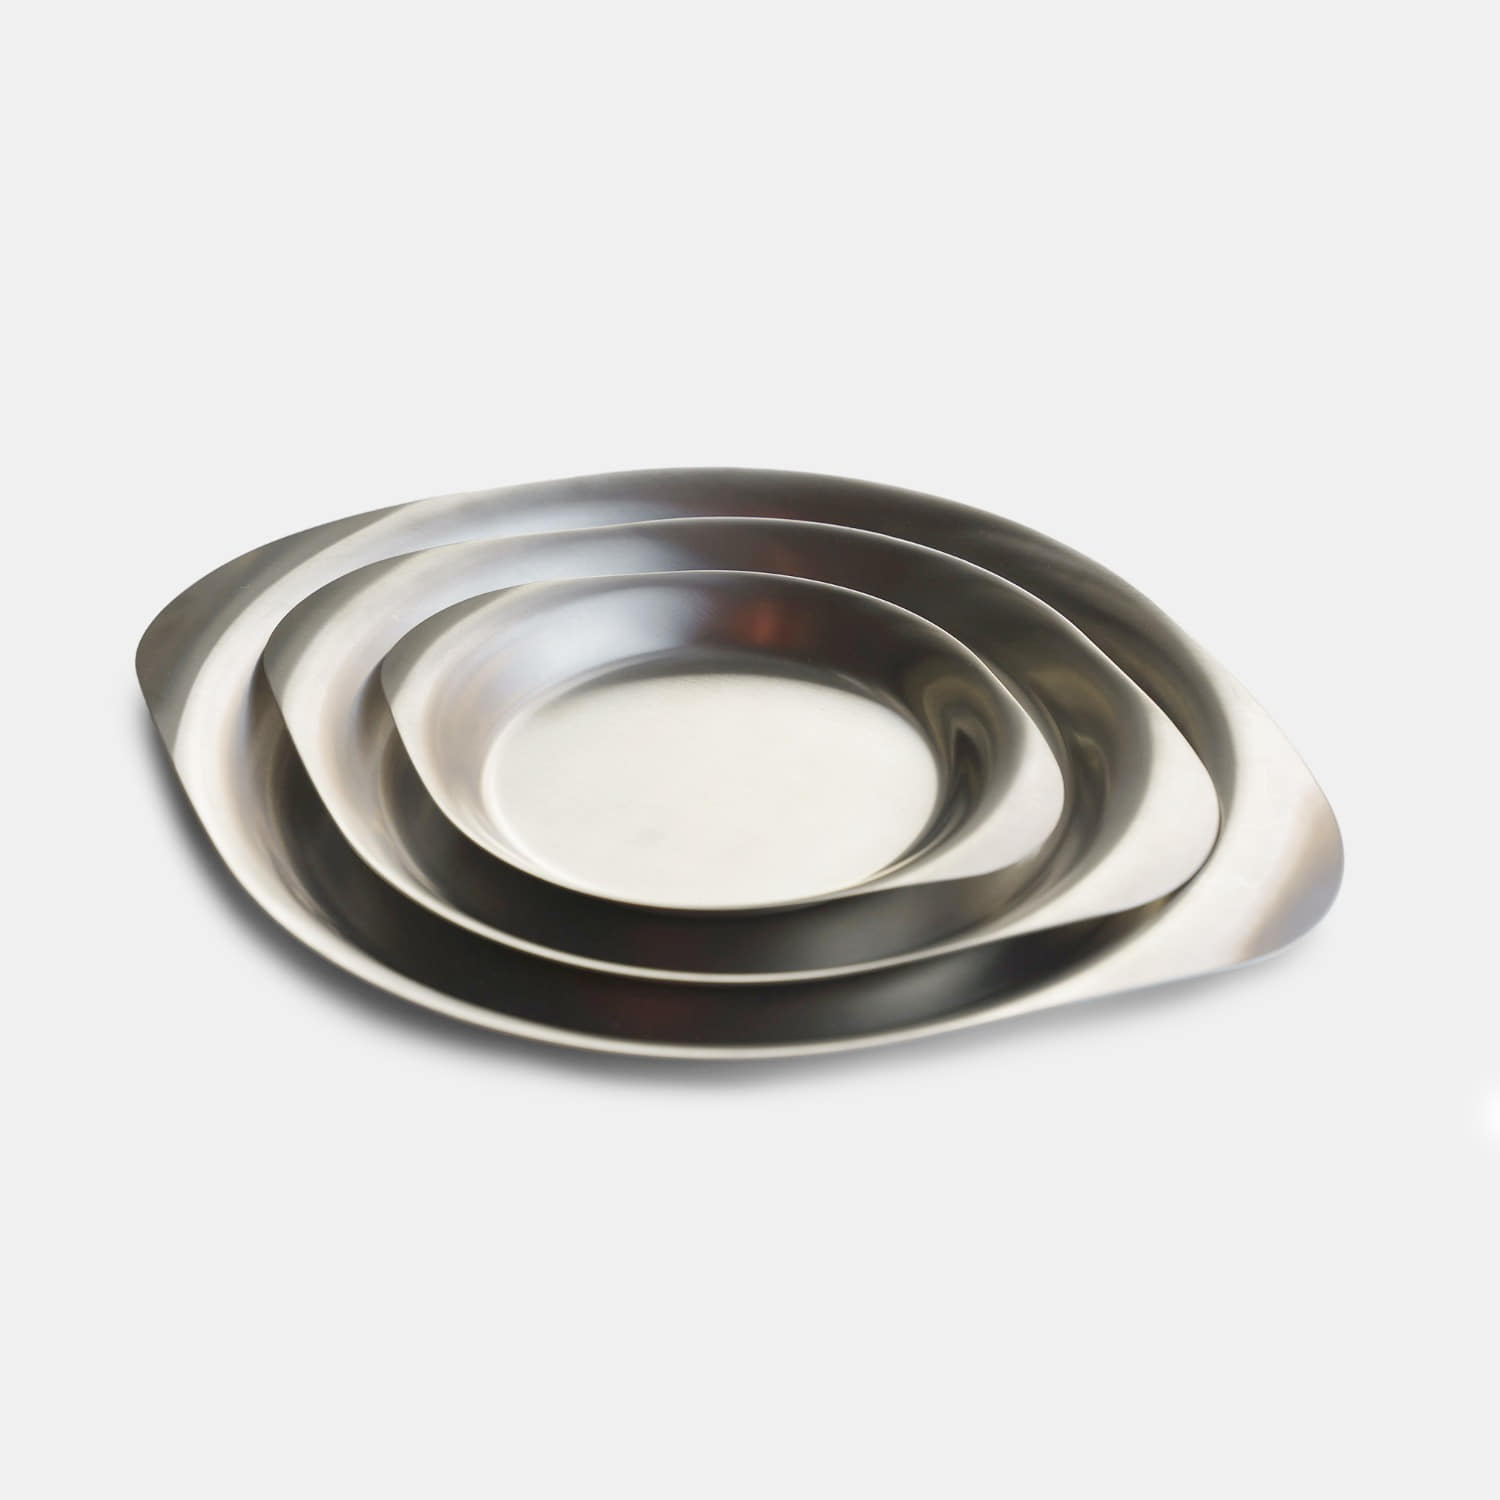 ﻿Stainless Steel Plate - 3size